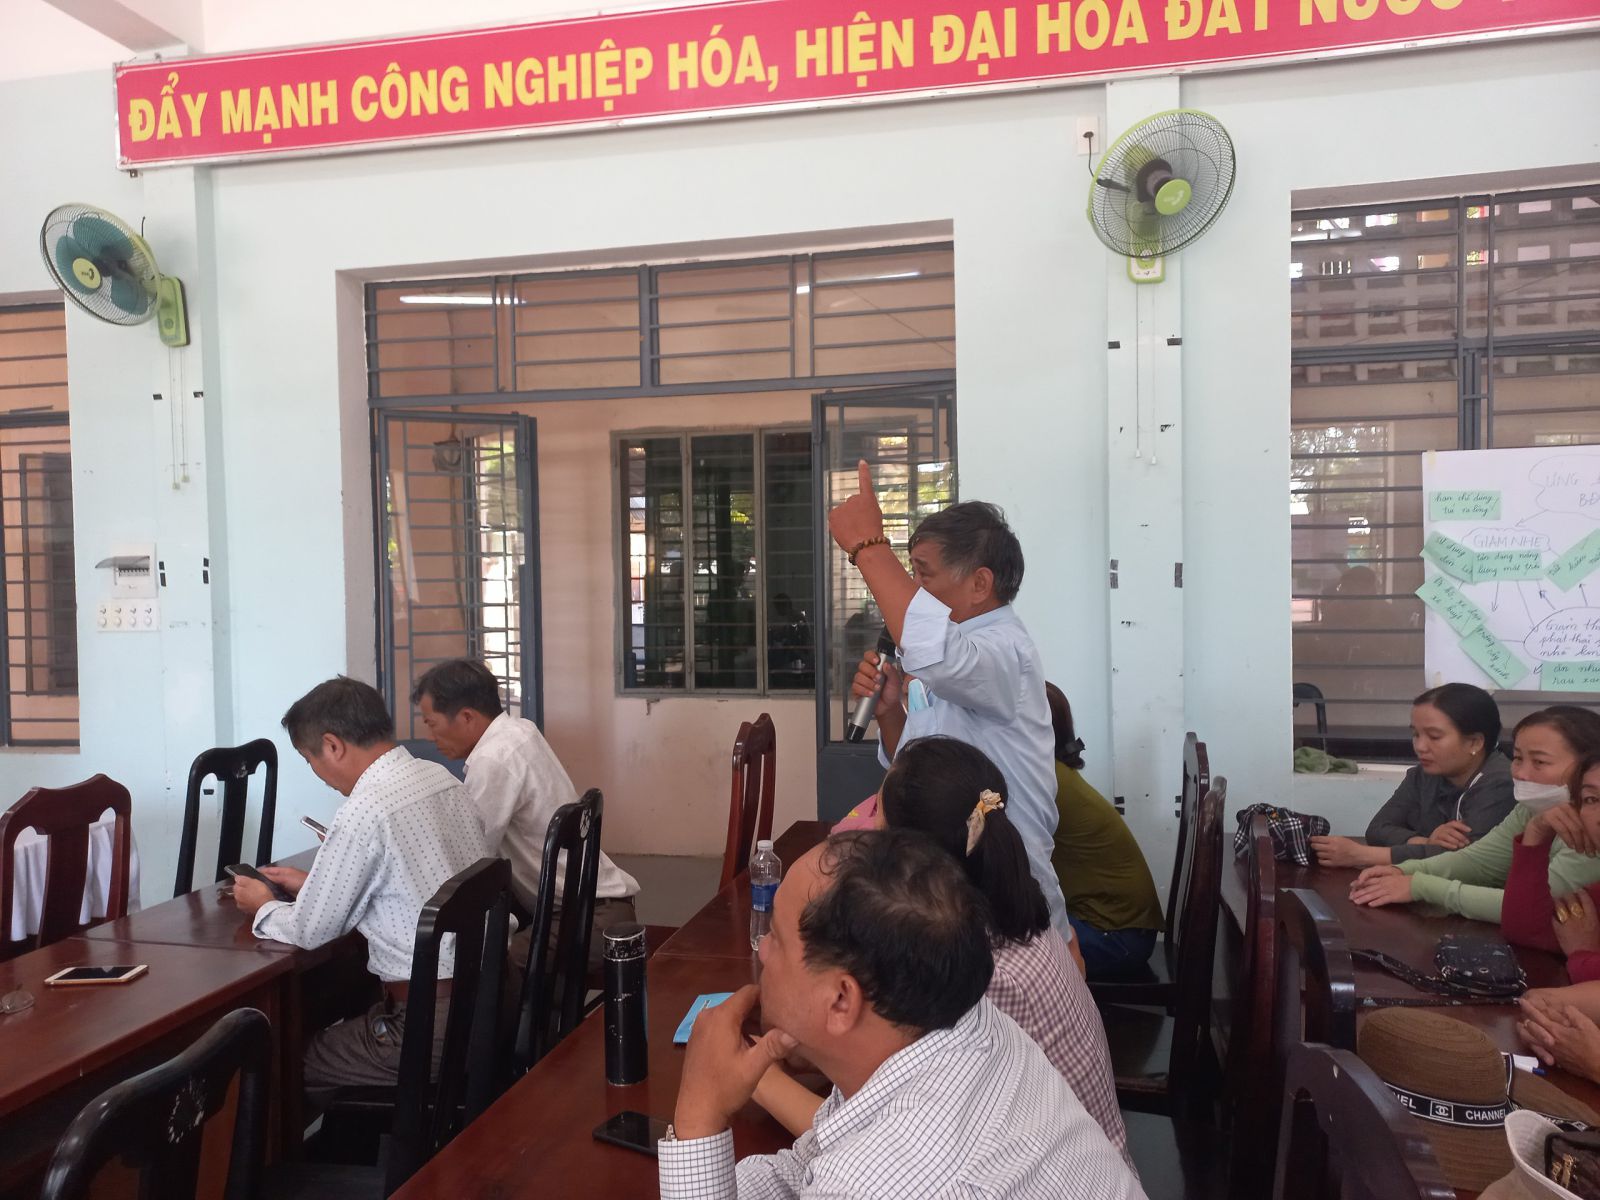 The core group shared contents in the training process (Hoa Vang)